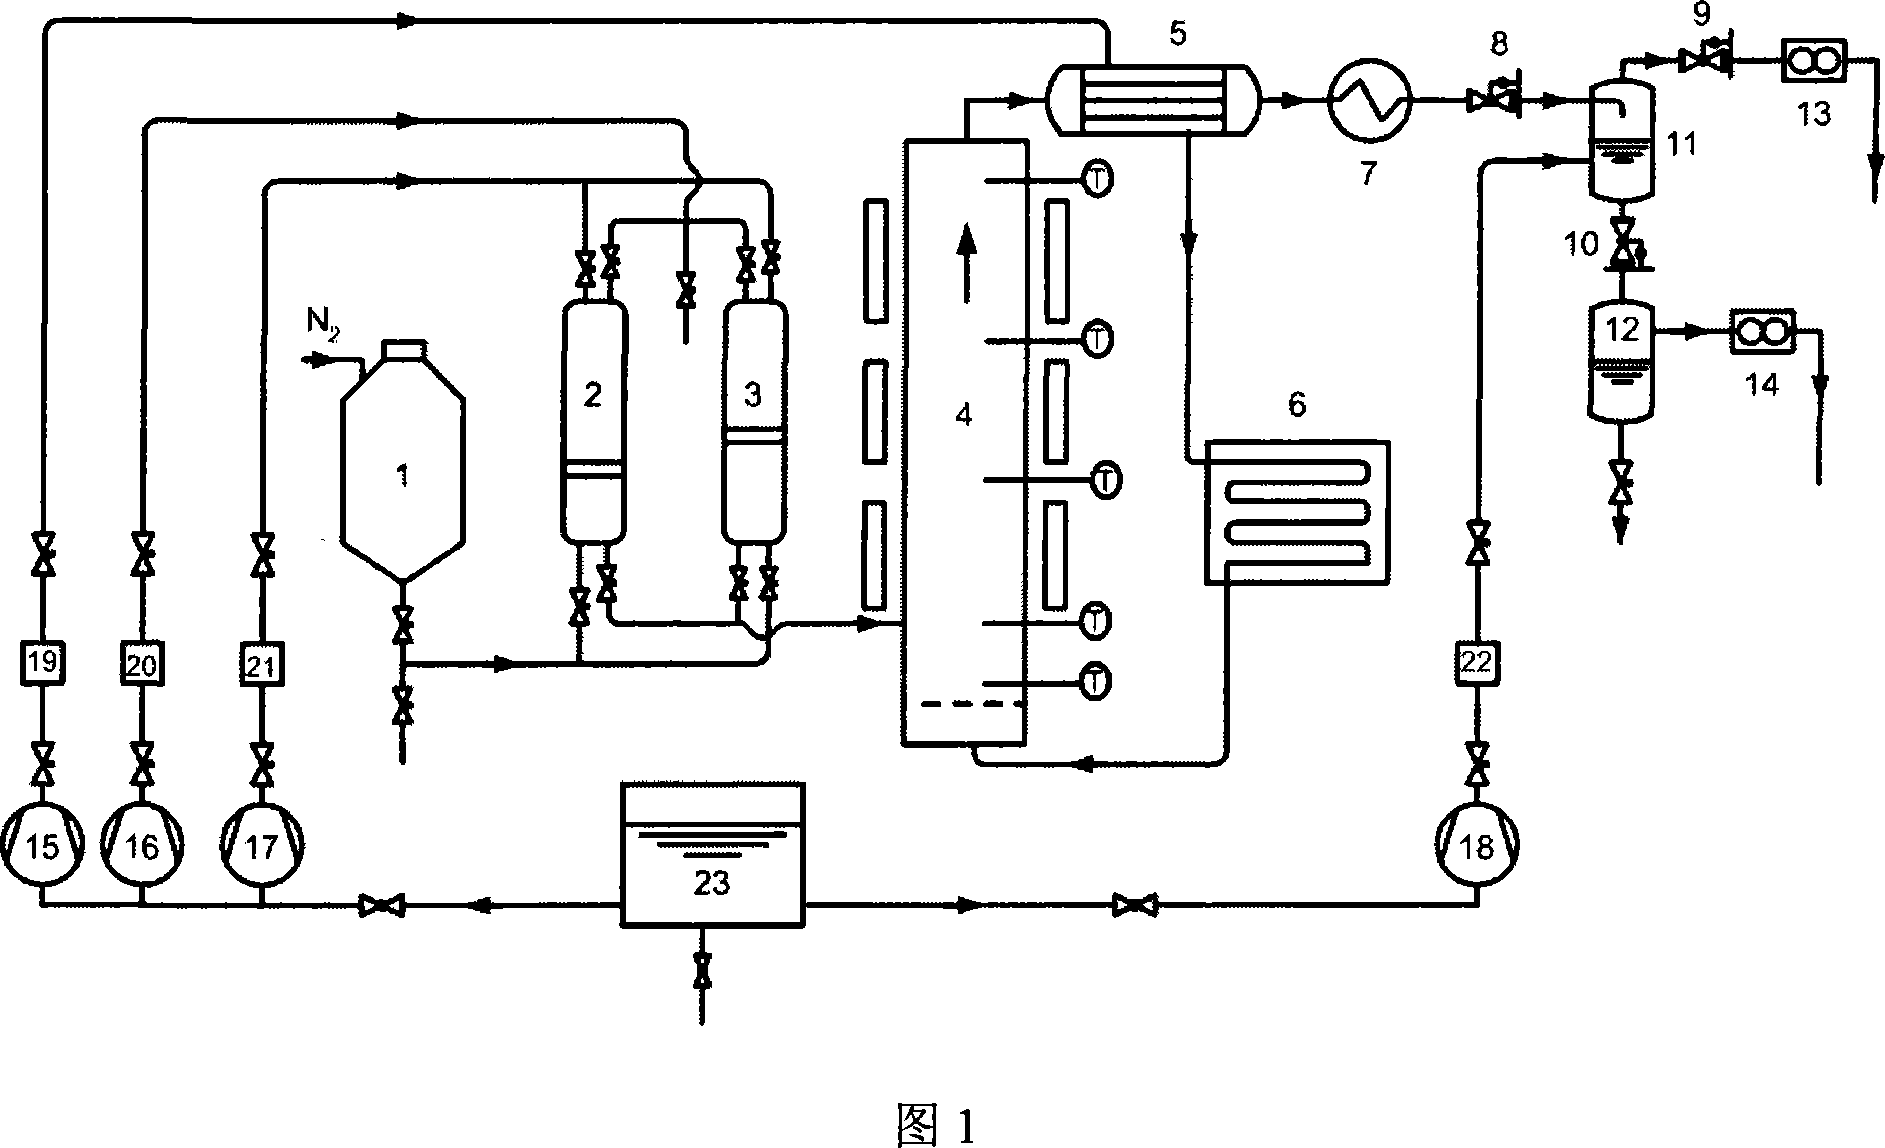 Biomass castoff supercritical water fluid bed partial oxidation hydrogen-preparation device and method